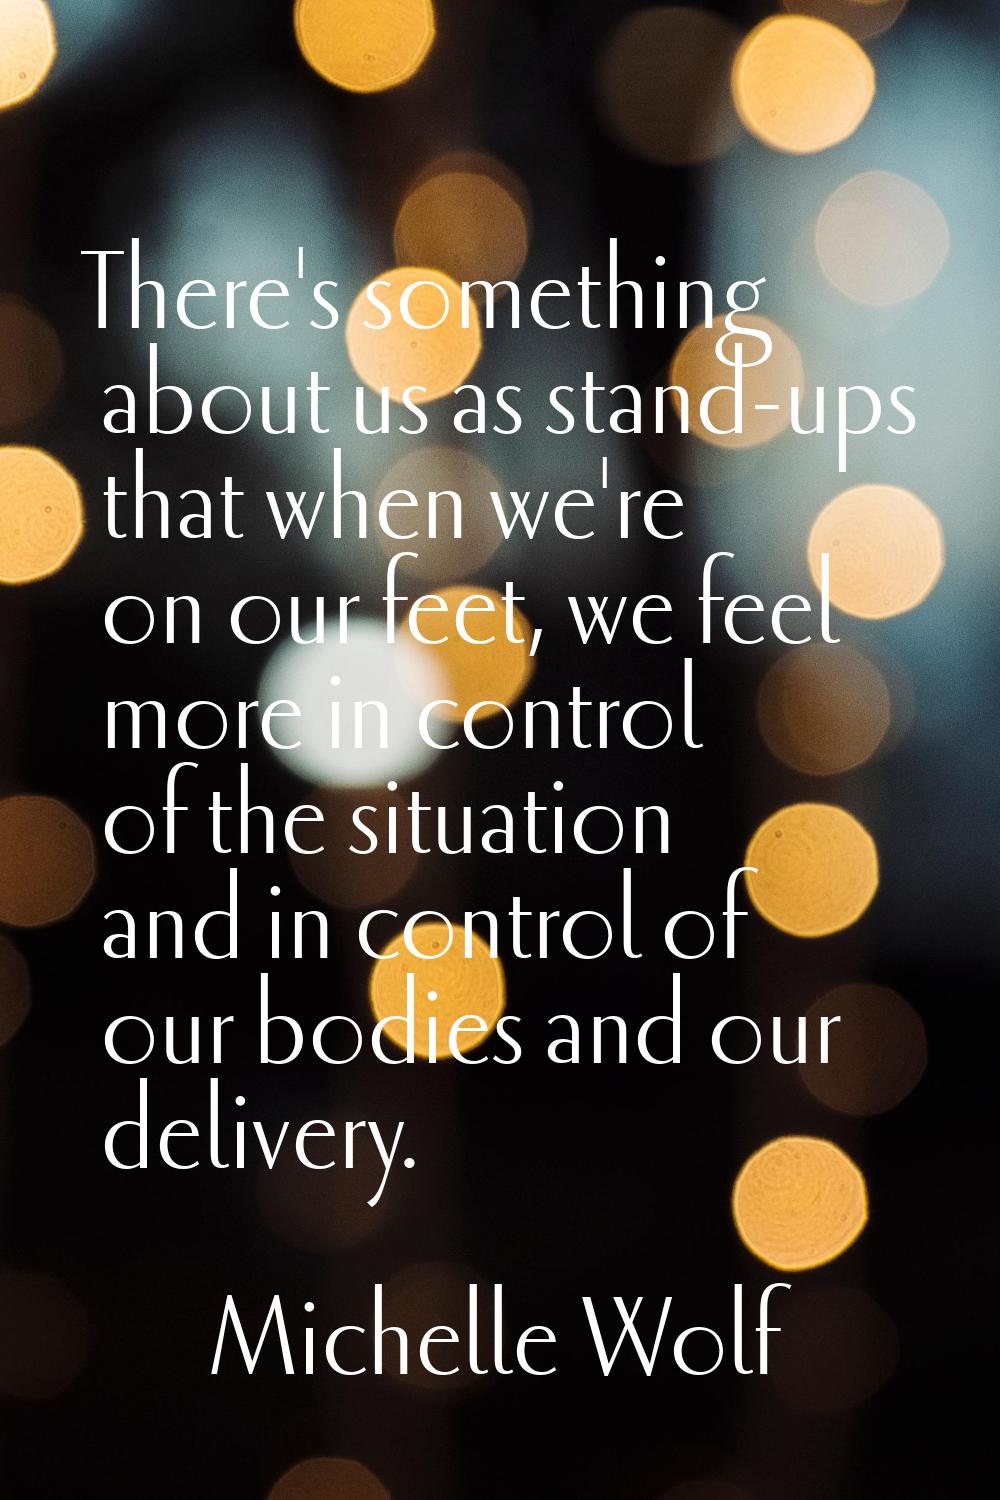 There's something about us as stand-ups that when we're on our feet, we feel more in control of the